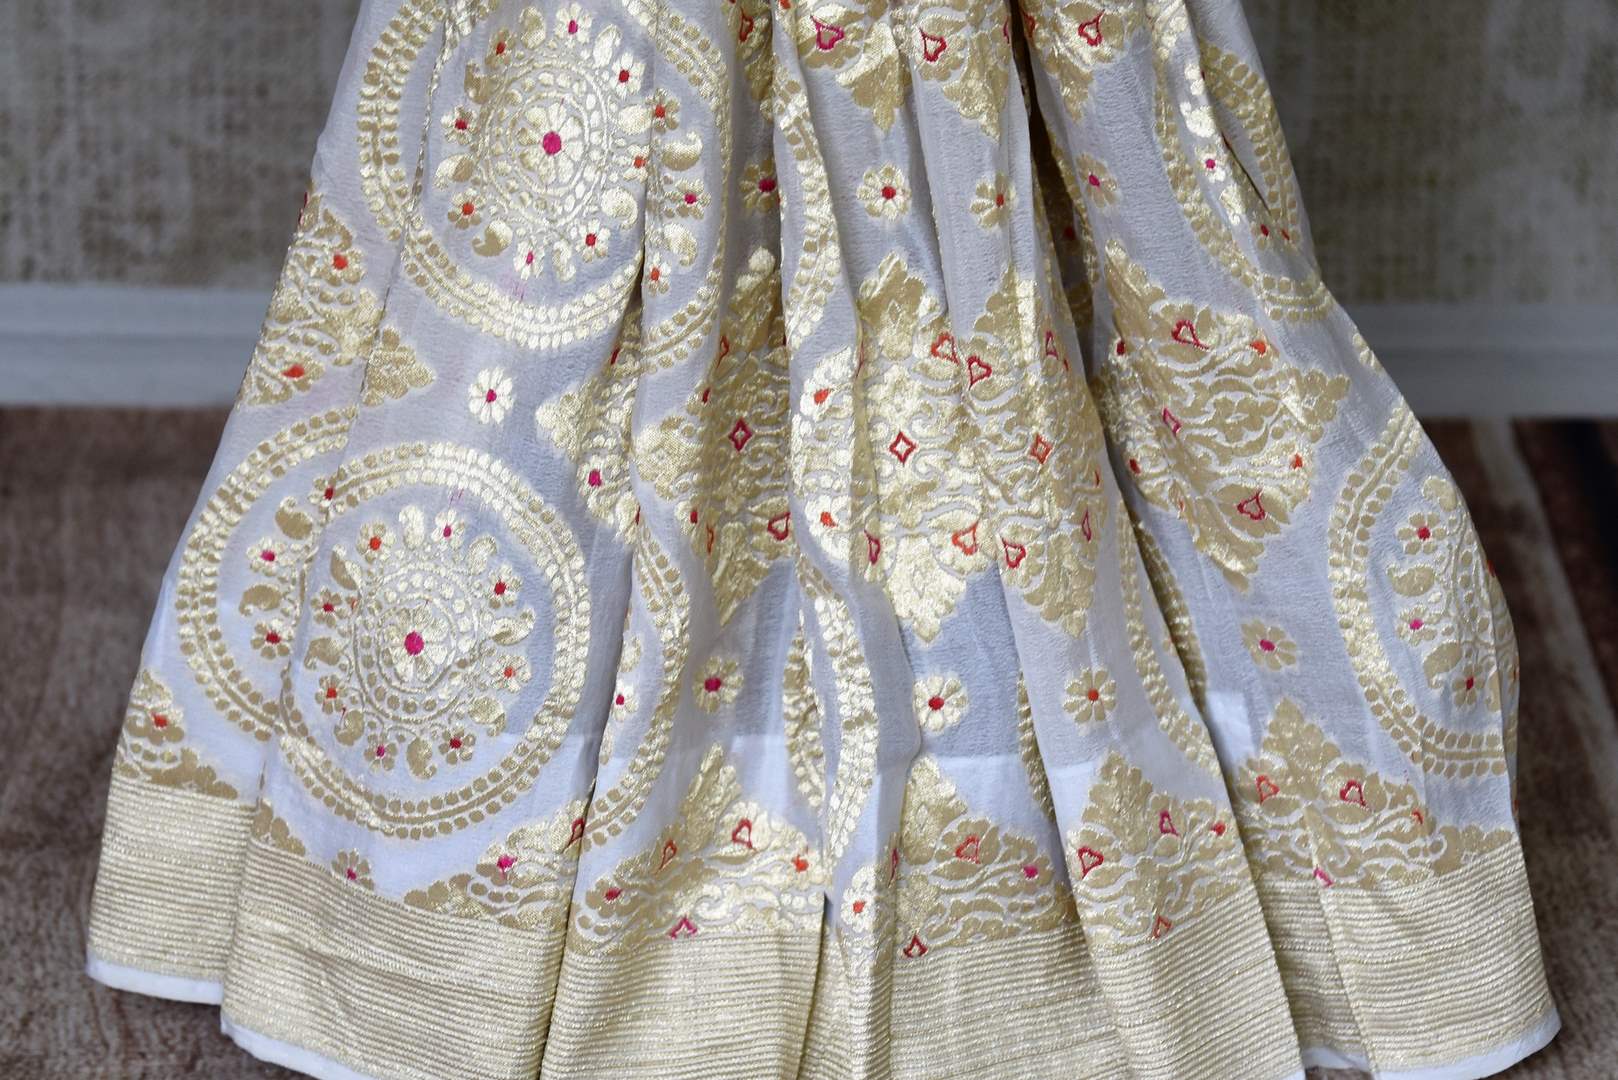 Buy off-white Banarasi georgette saree online in USA with overall zari work from Pure Elegance online store. Visit our exclusive Indian clothing store in USA and get floored by a range of exquisite Indian Kanjivaram saris, Banarasi sarees, silk sarees, Indian jewelry and much more to complete your ethnic look.-pleats